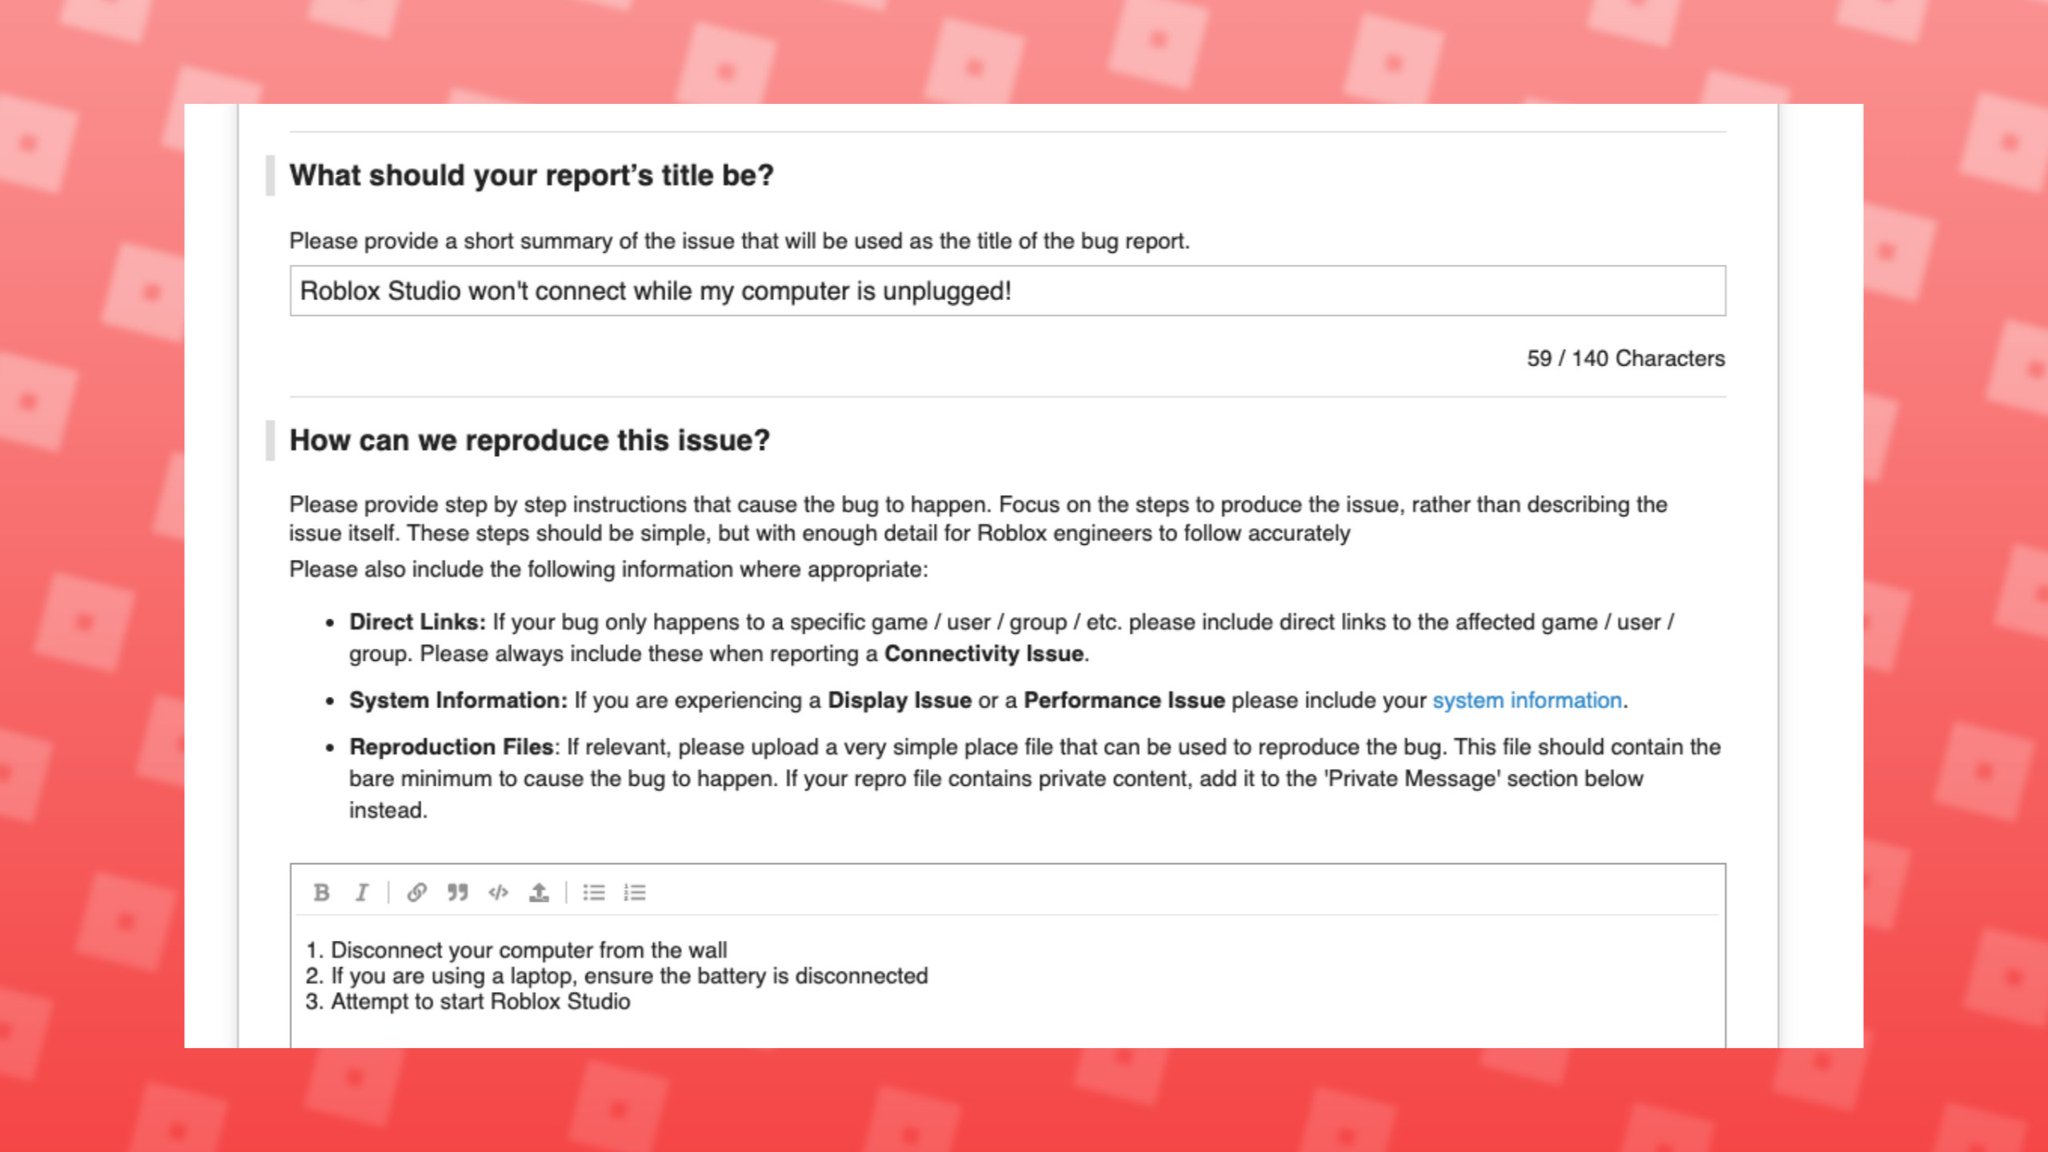 Rbxnews On Twitter Introducing The Bug Report Wizard Beta Available To Regular Robloxdev Forum Members This Tool Allows You To Send Bug Reports To Roblox Devforum Https T Co Pmxzsfjldp News Https T Co Ahdyyybbeq - roblox studio bug report